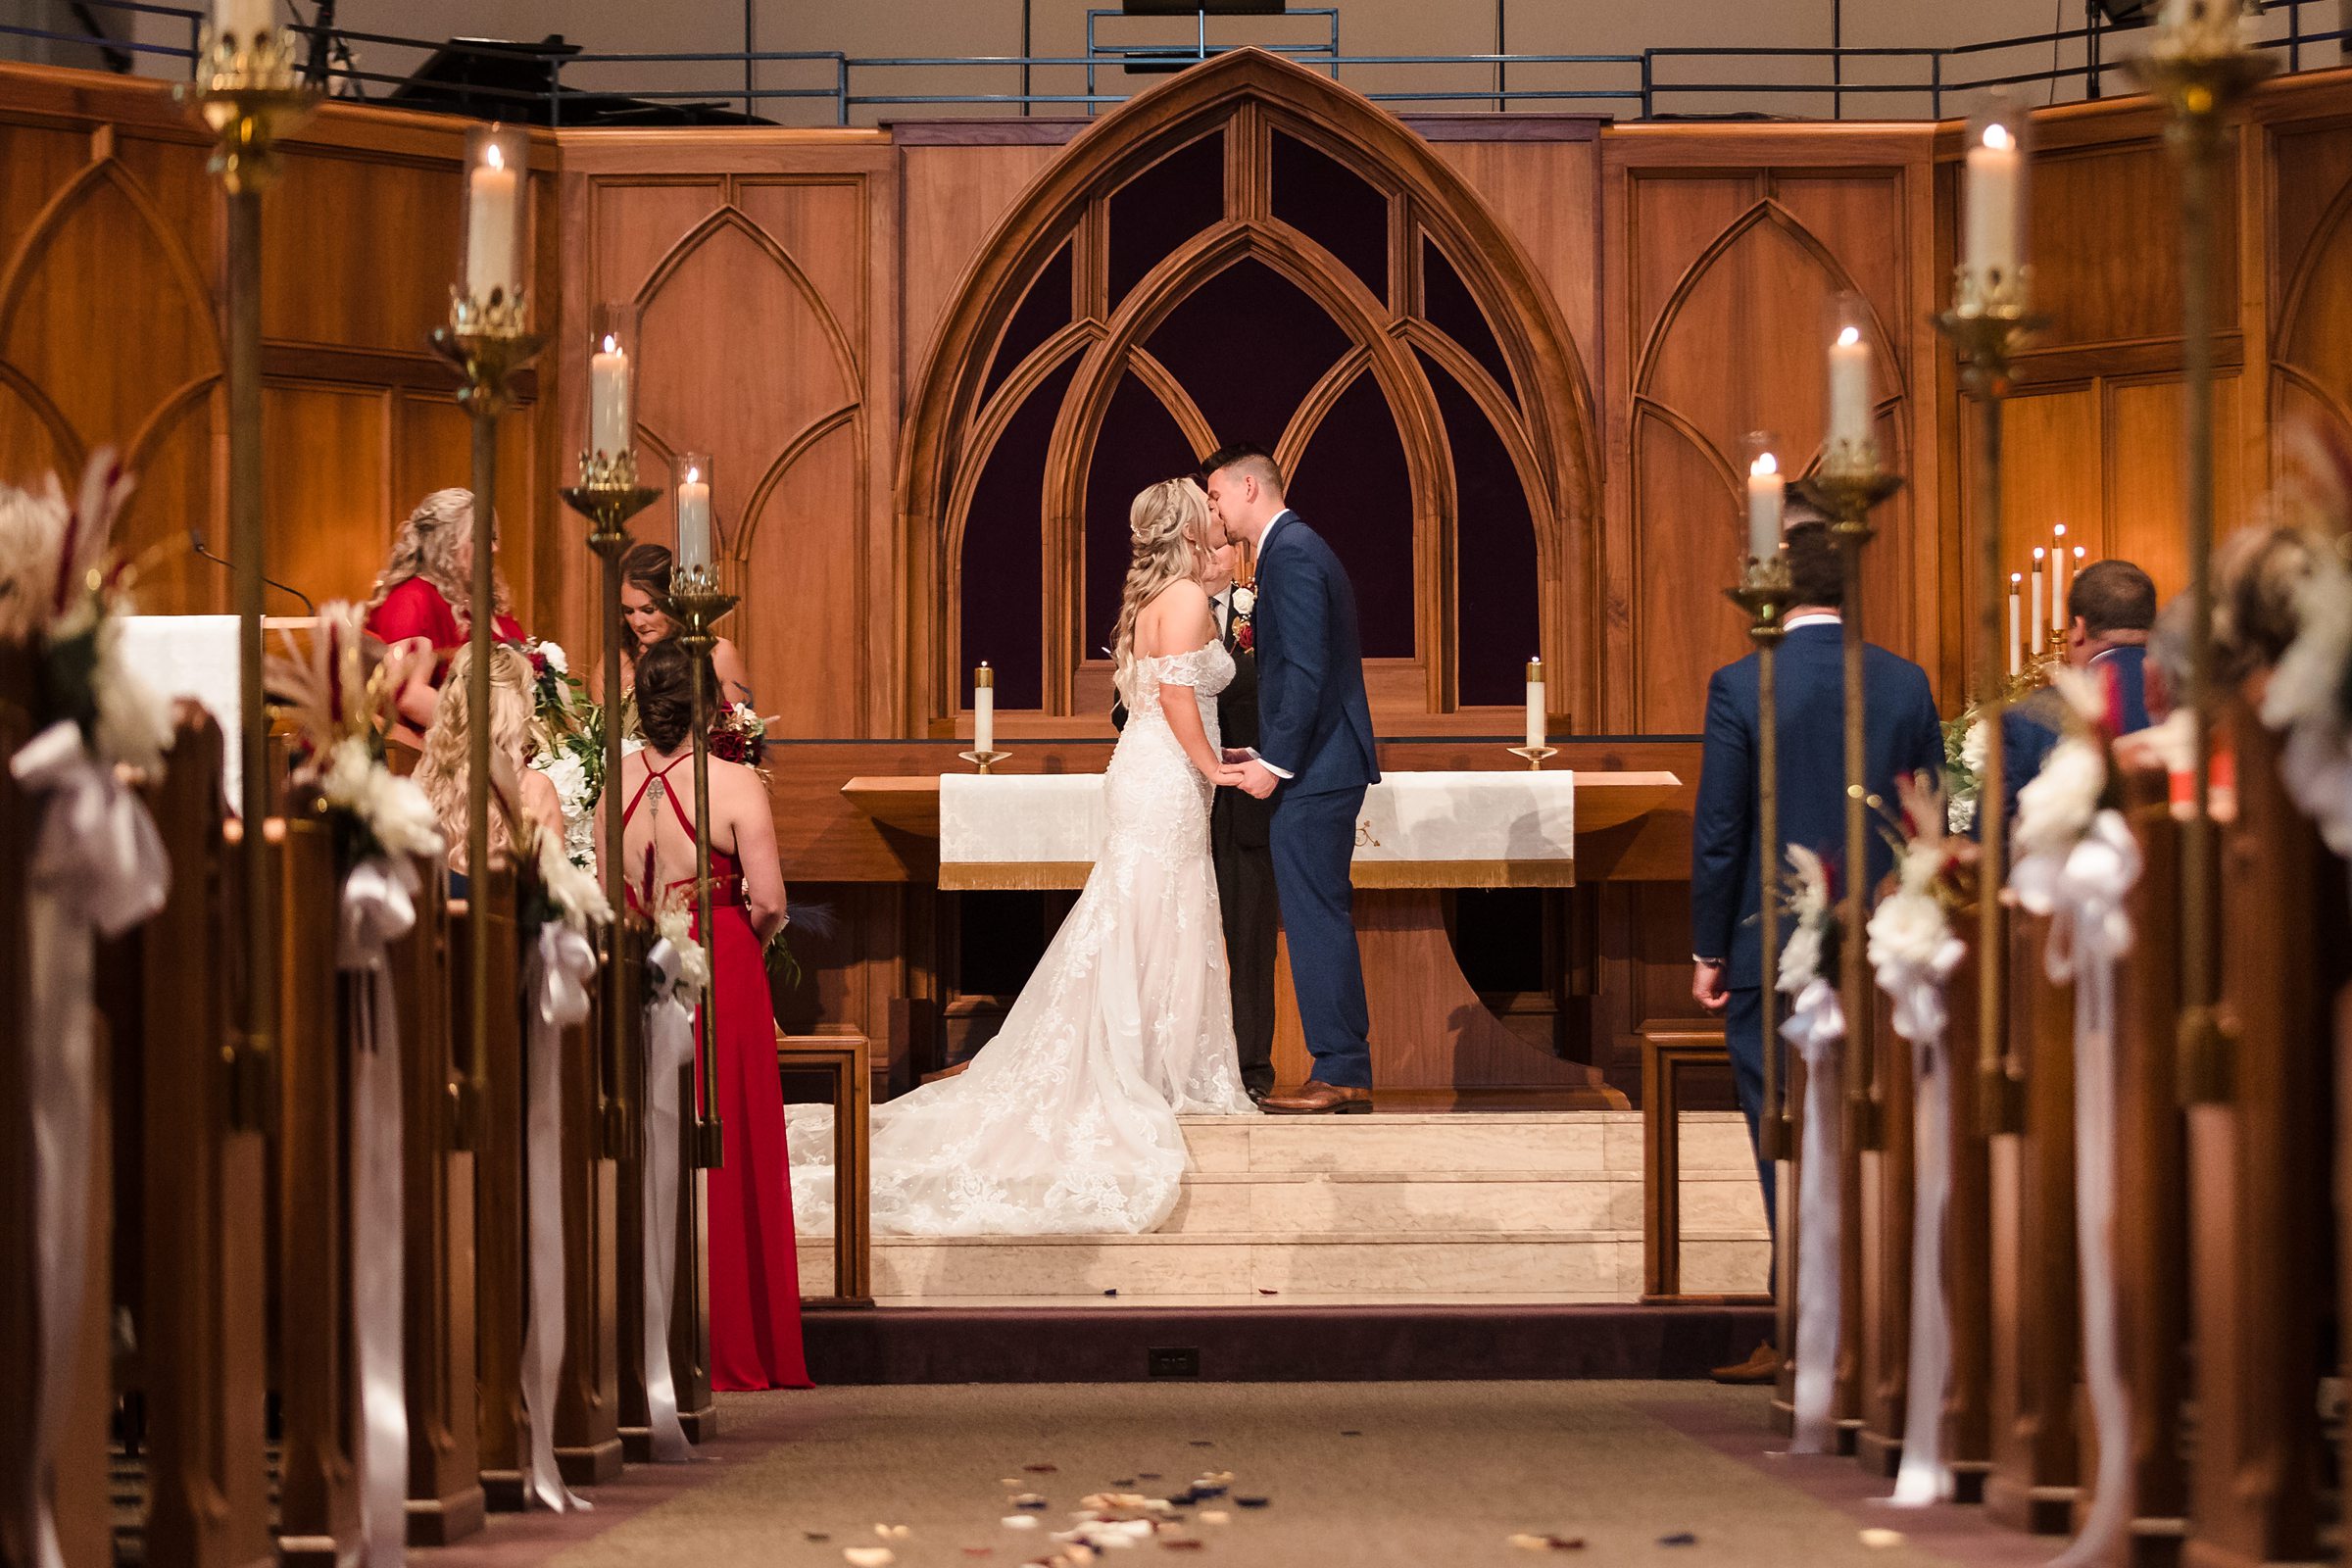 The first kiss during a wedding at the First United Methodist Church in Peoria, Illinois